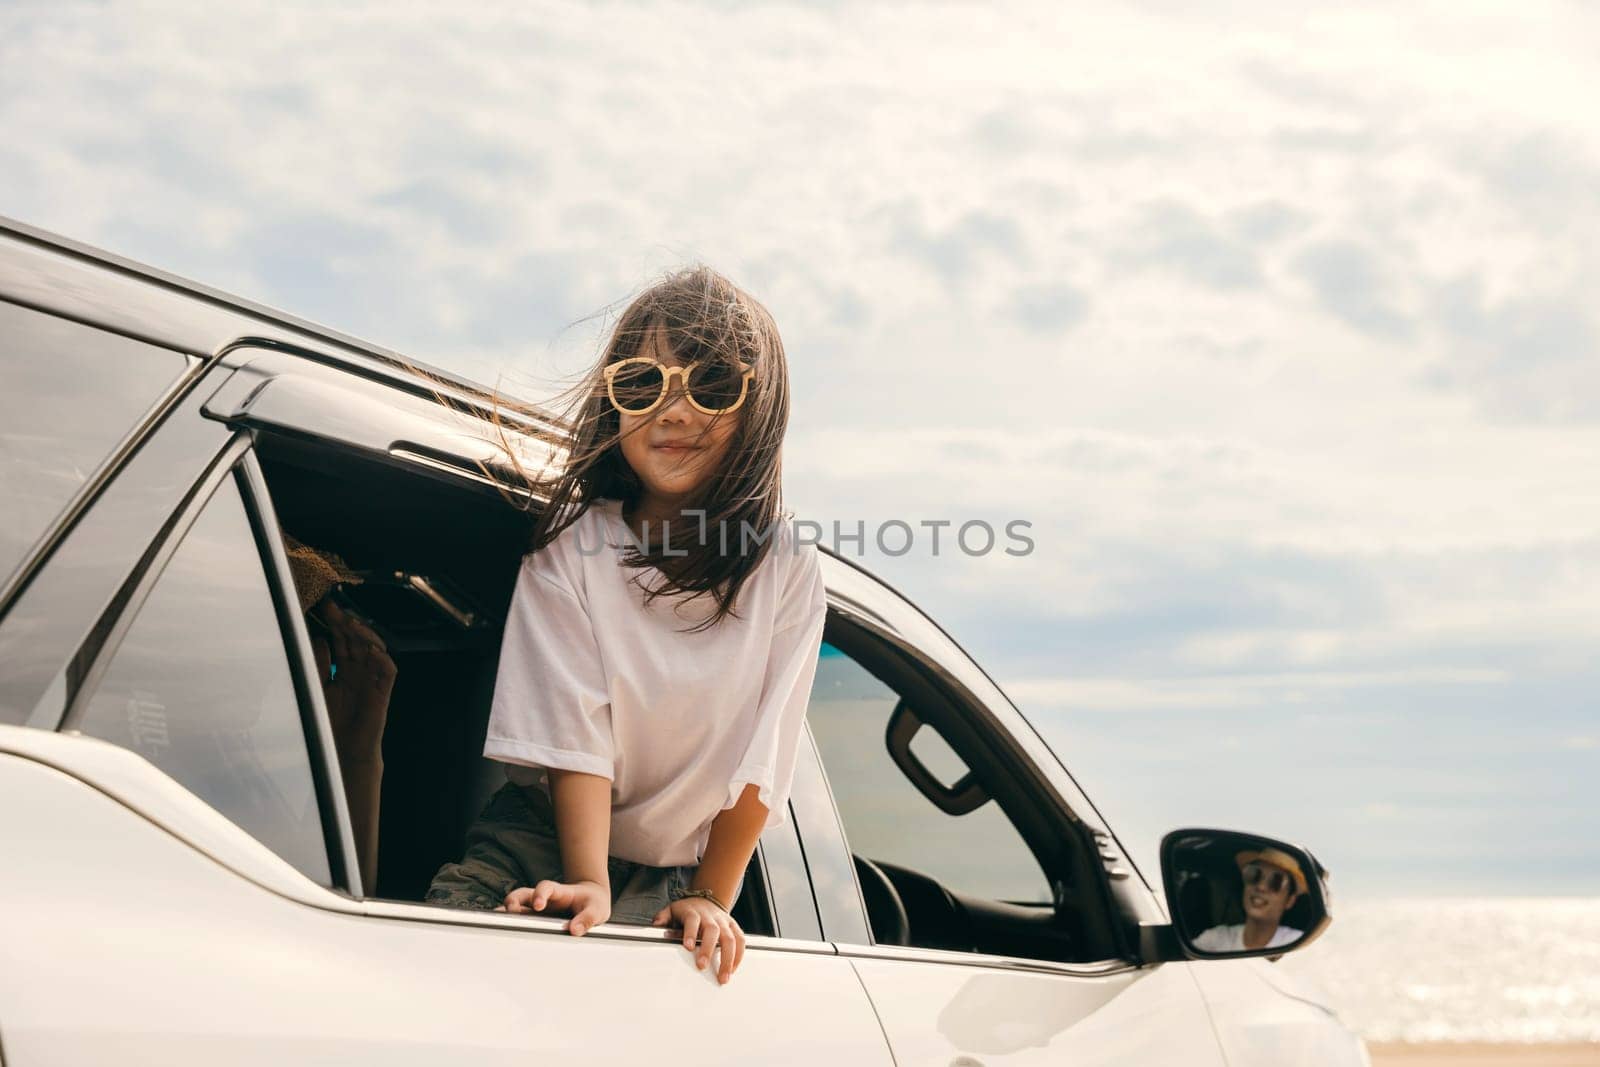 Father, mother and children girl smiling having fun sitting in compact white car look out window blue sky, Summer at beach, Car insurance, Family holiday vacation travel, car travel, Happy family day